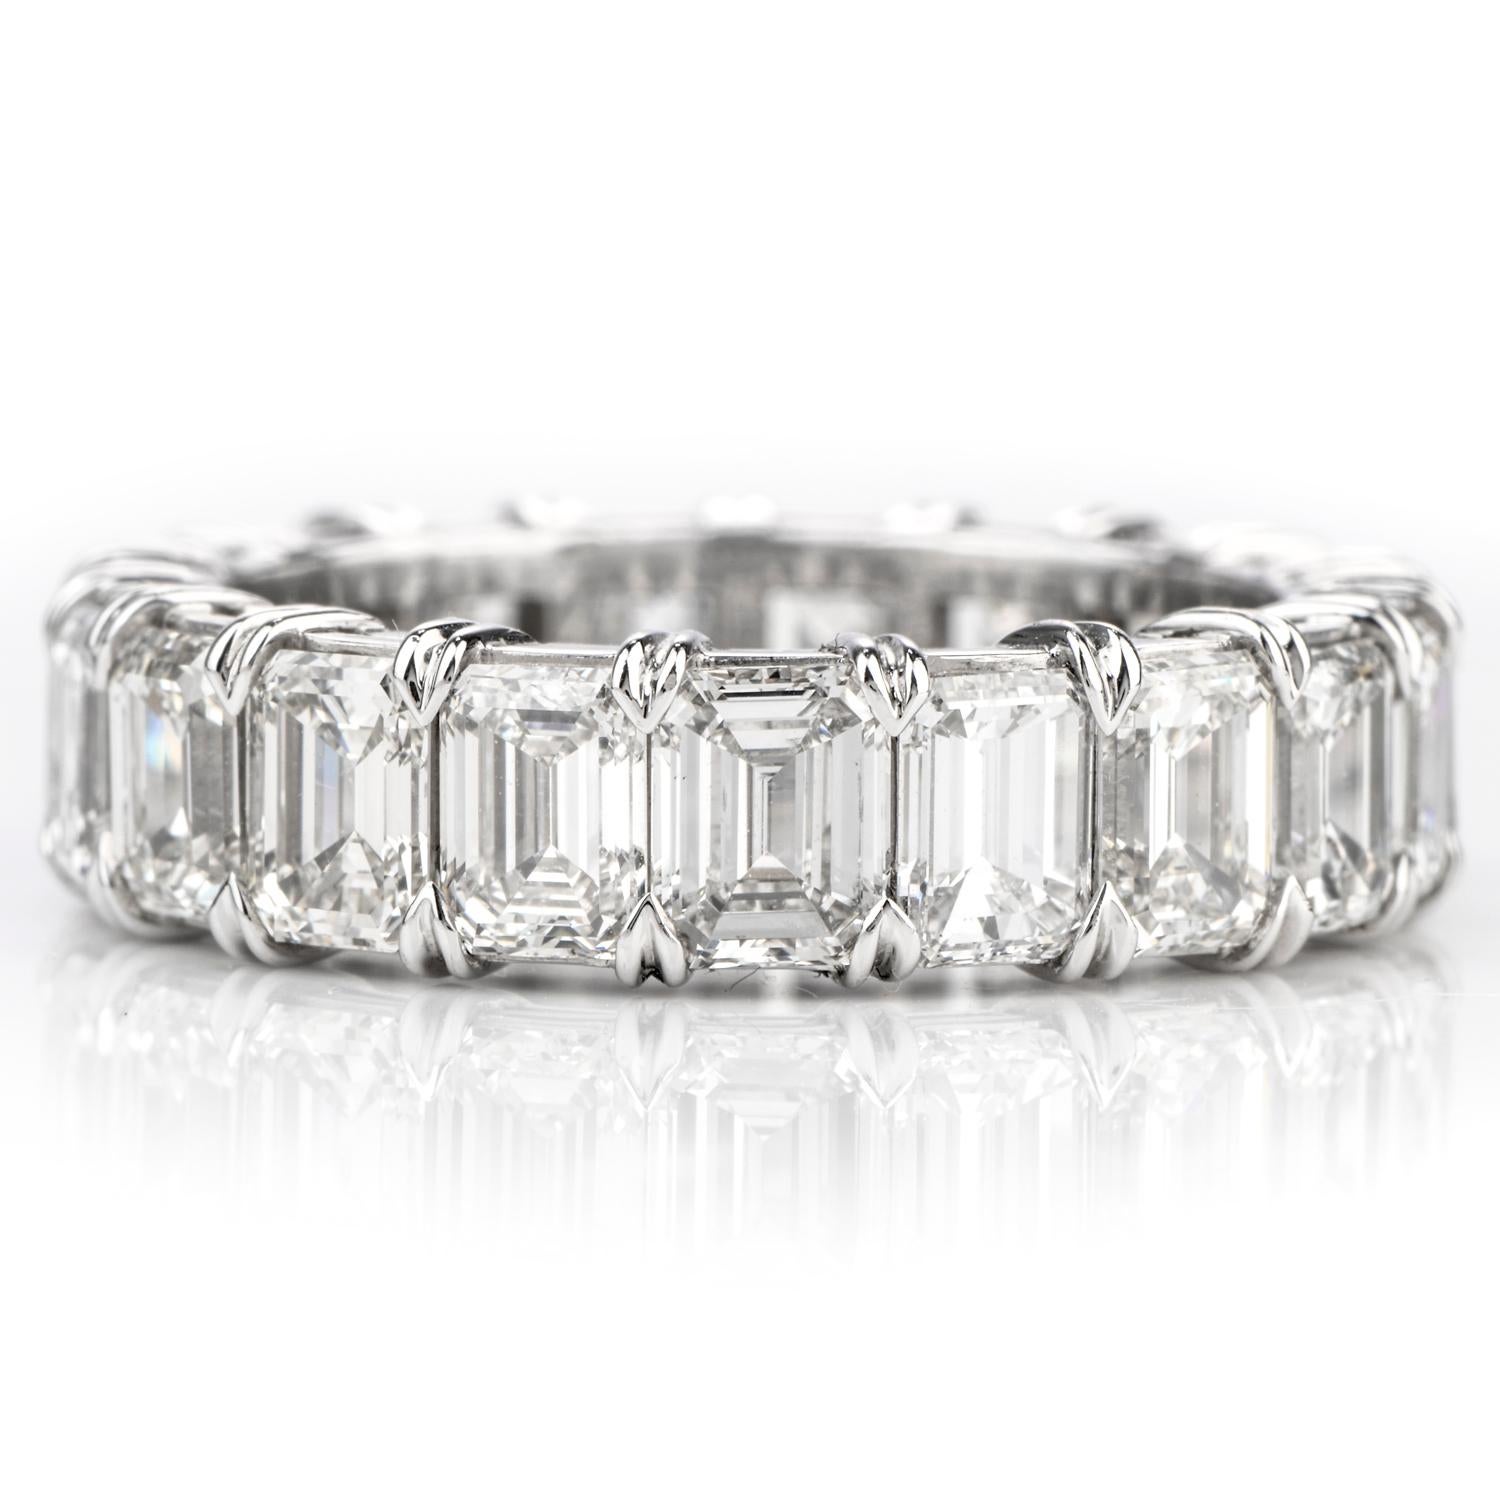 Encircle her with all your love with this stunning Spacial Hand crafted Emerald Cut Diamond Eternity

Band crafted in luxurious Platinum.  

19 beautifully matched vibrant white emerlad cut diamonds run

completely around the finger.  Each diamond